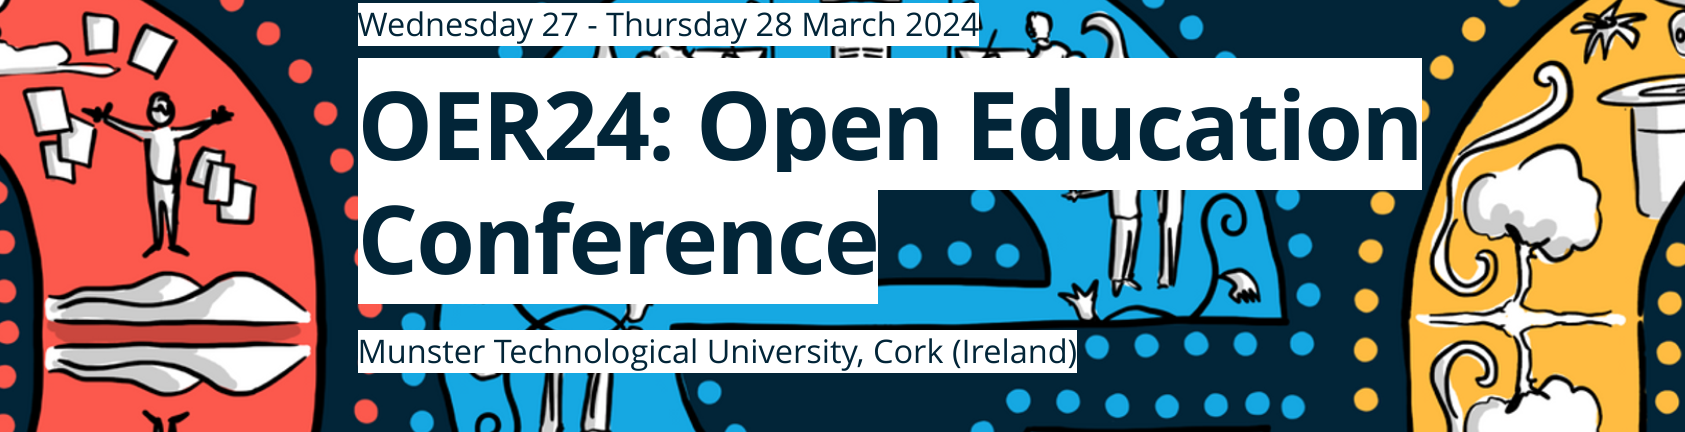 National Strategy for Open Education Practices Strategy would widen access to education in Ireland – OER24